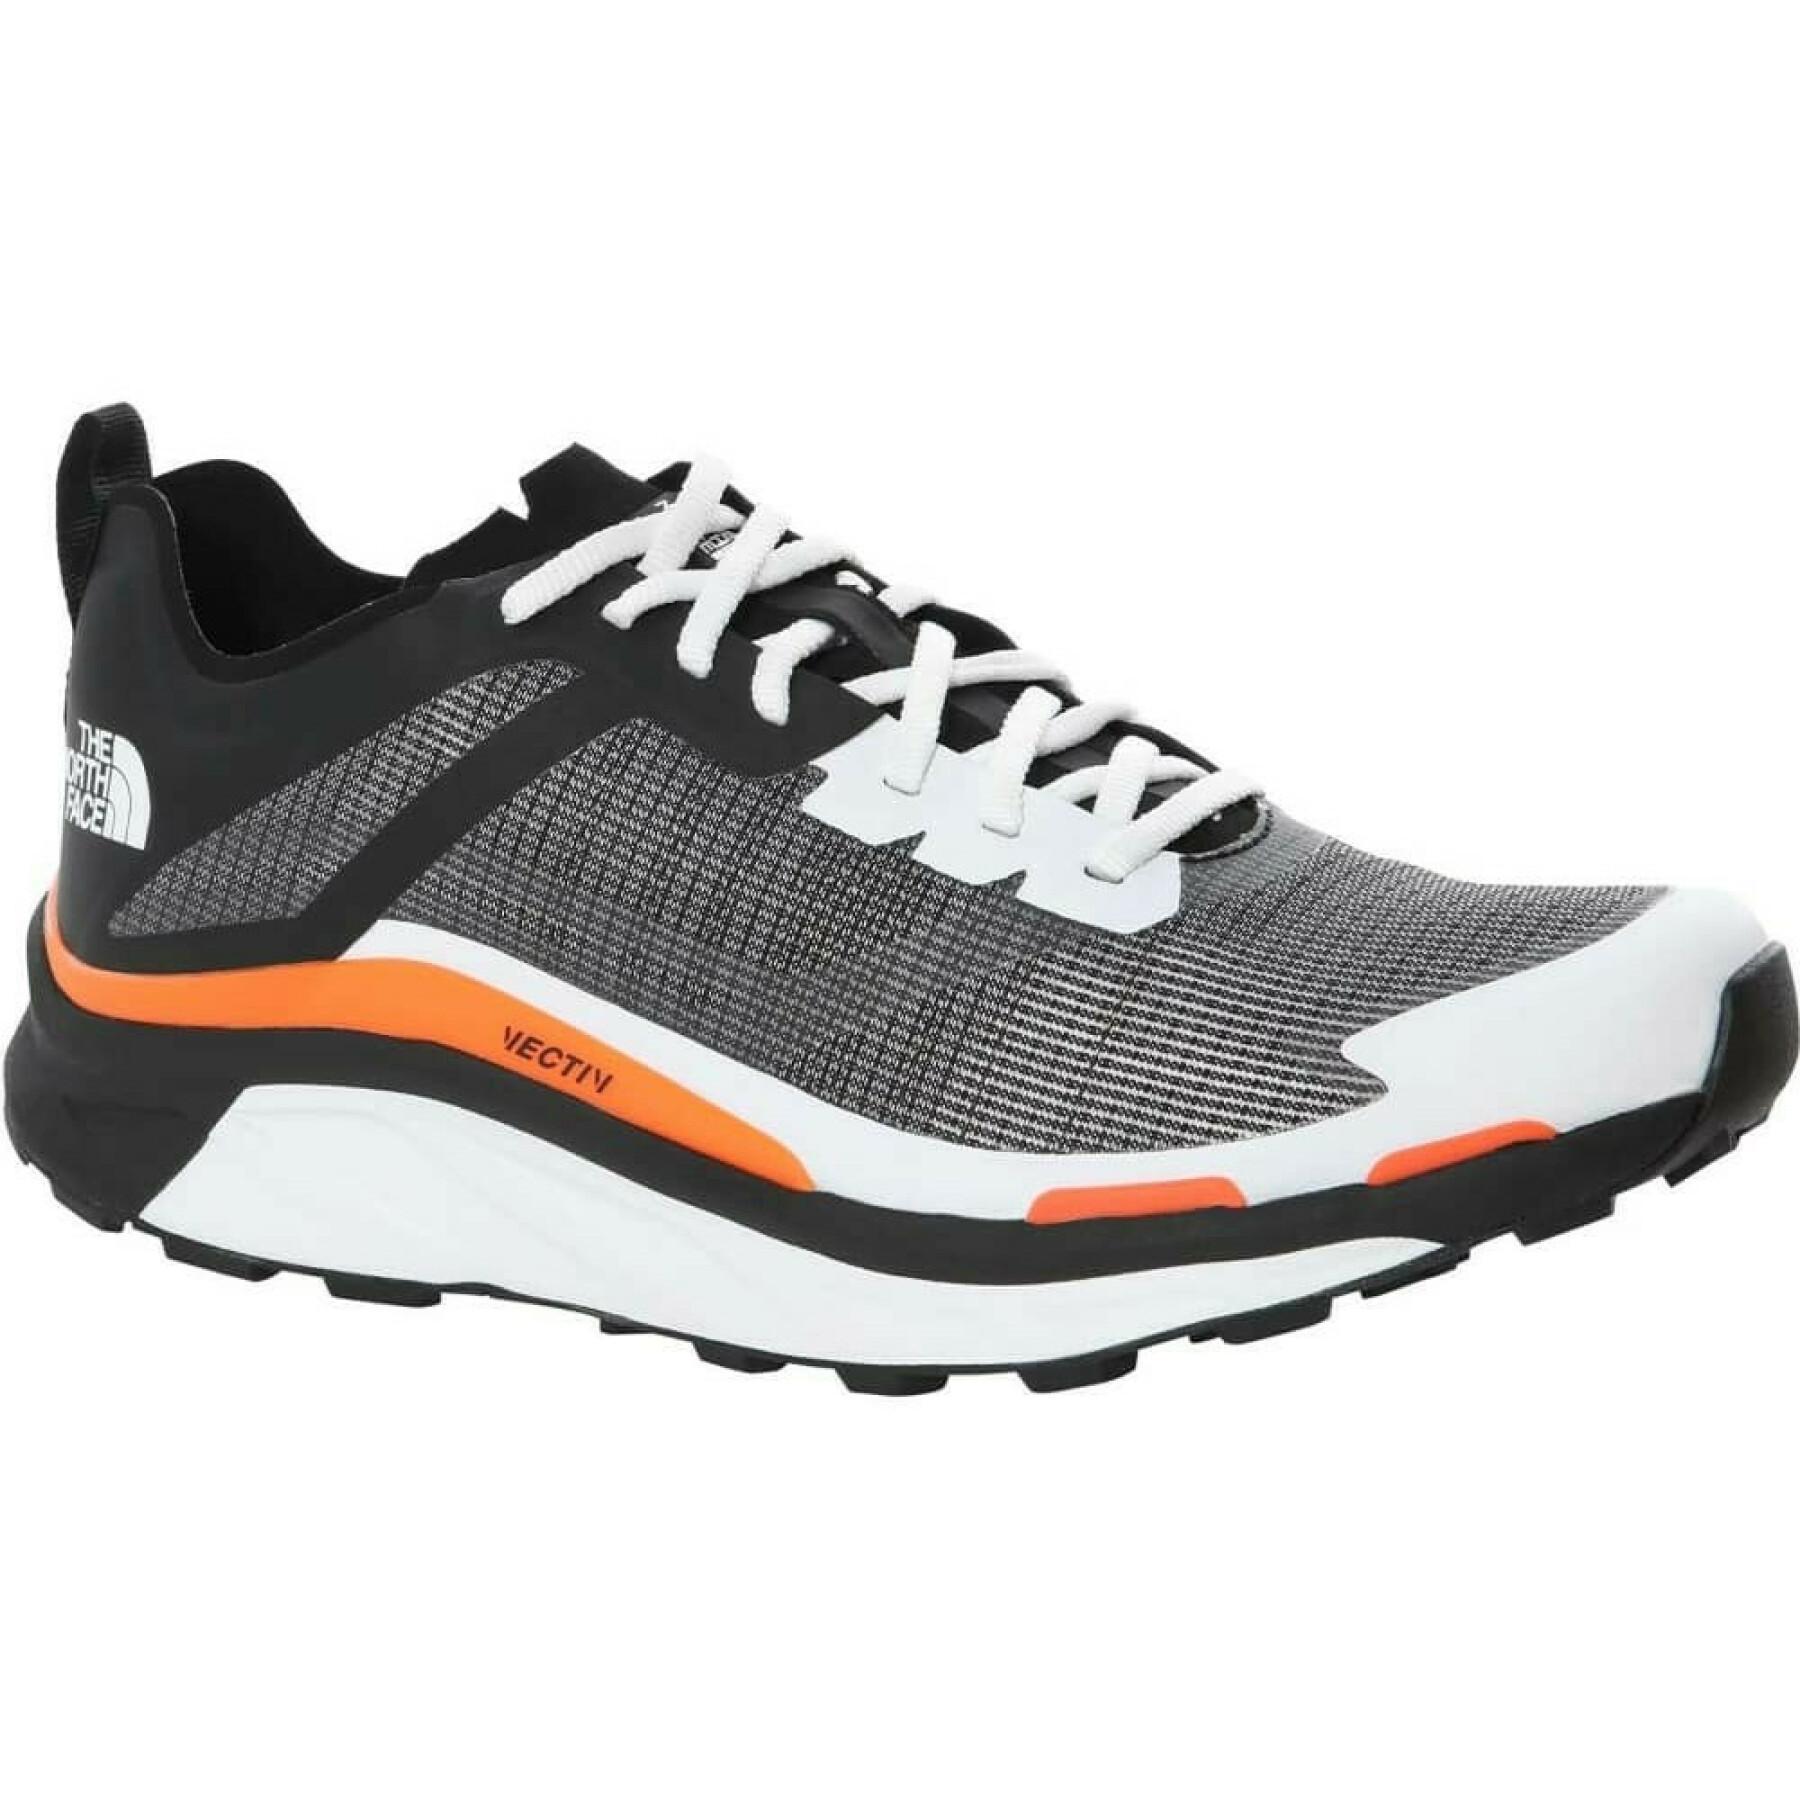 Trail shoes The North Face Vectiv Infinite